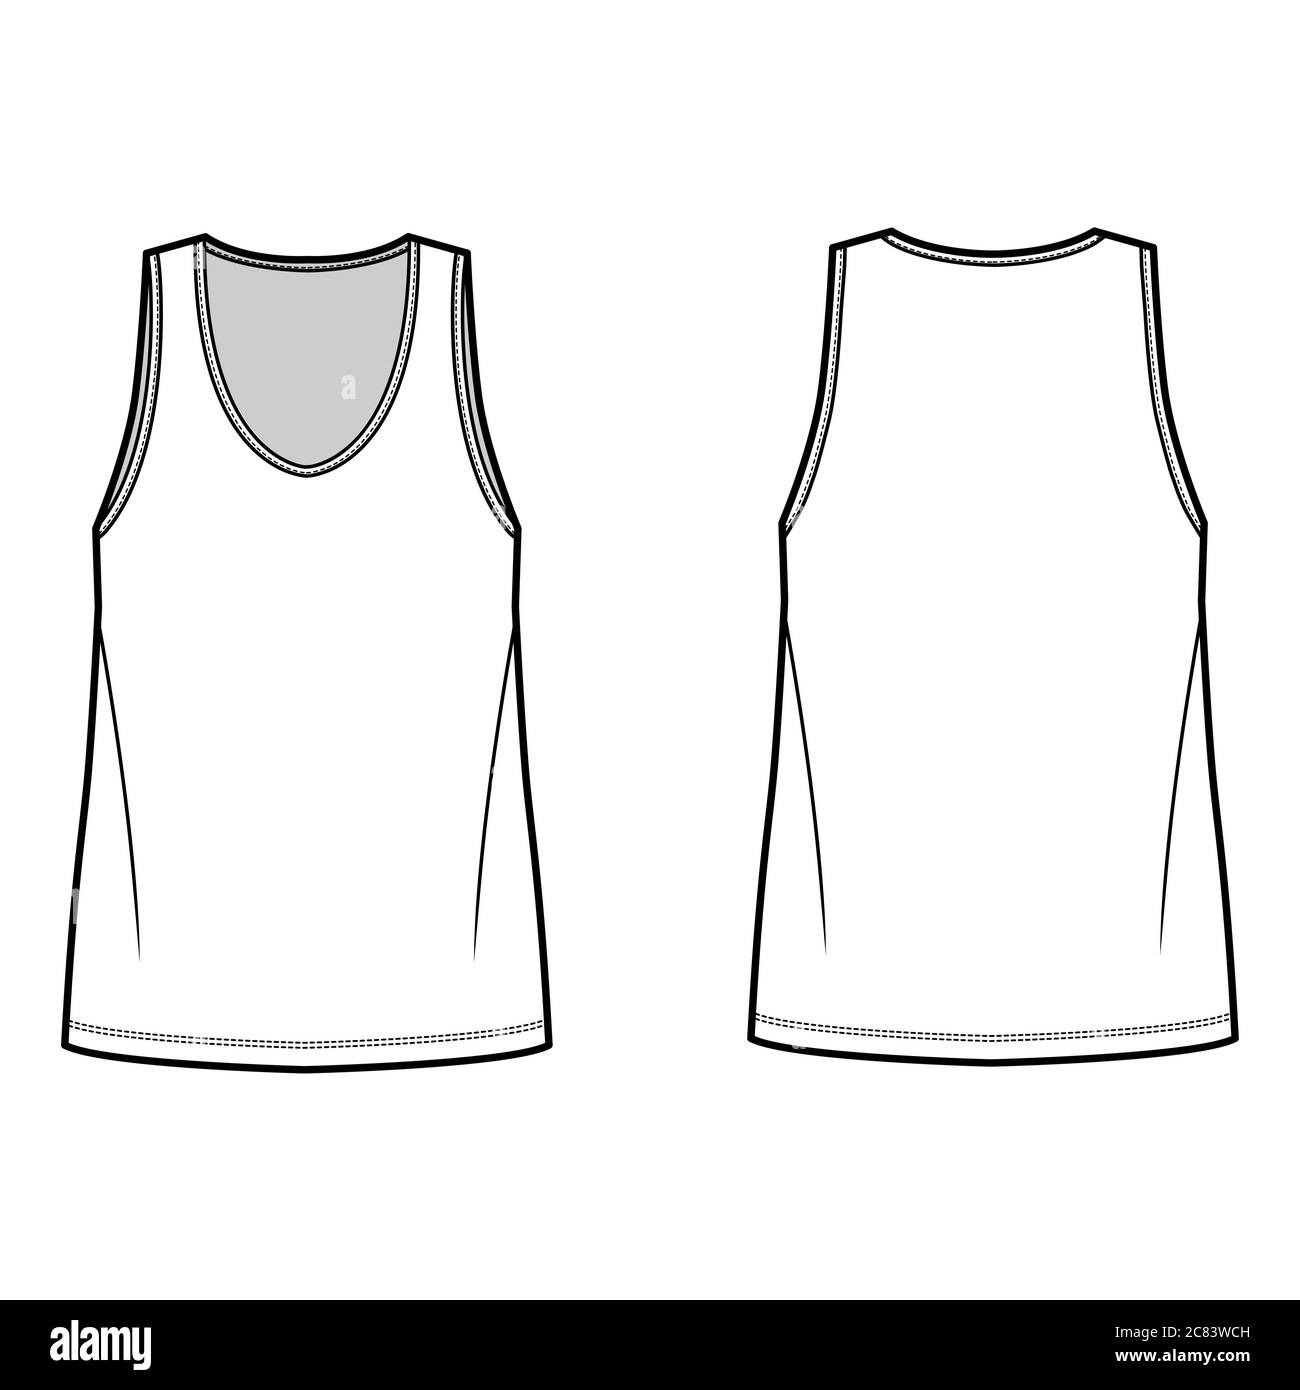 Tank top technical fashion illustration with oversized body, bonded ...